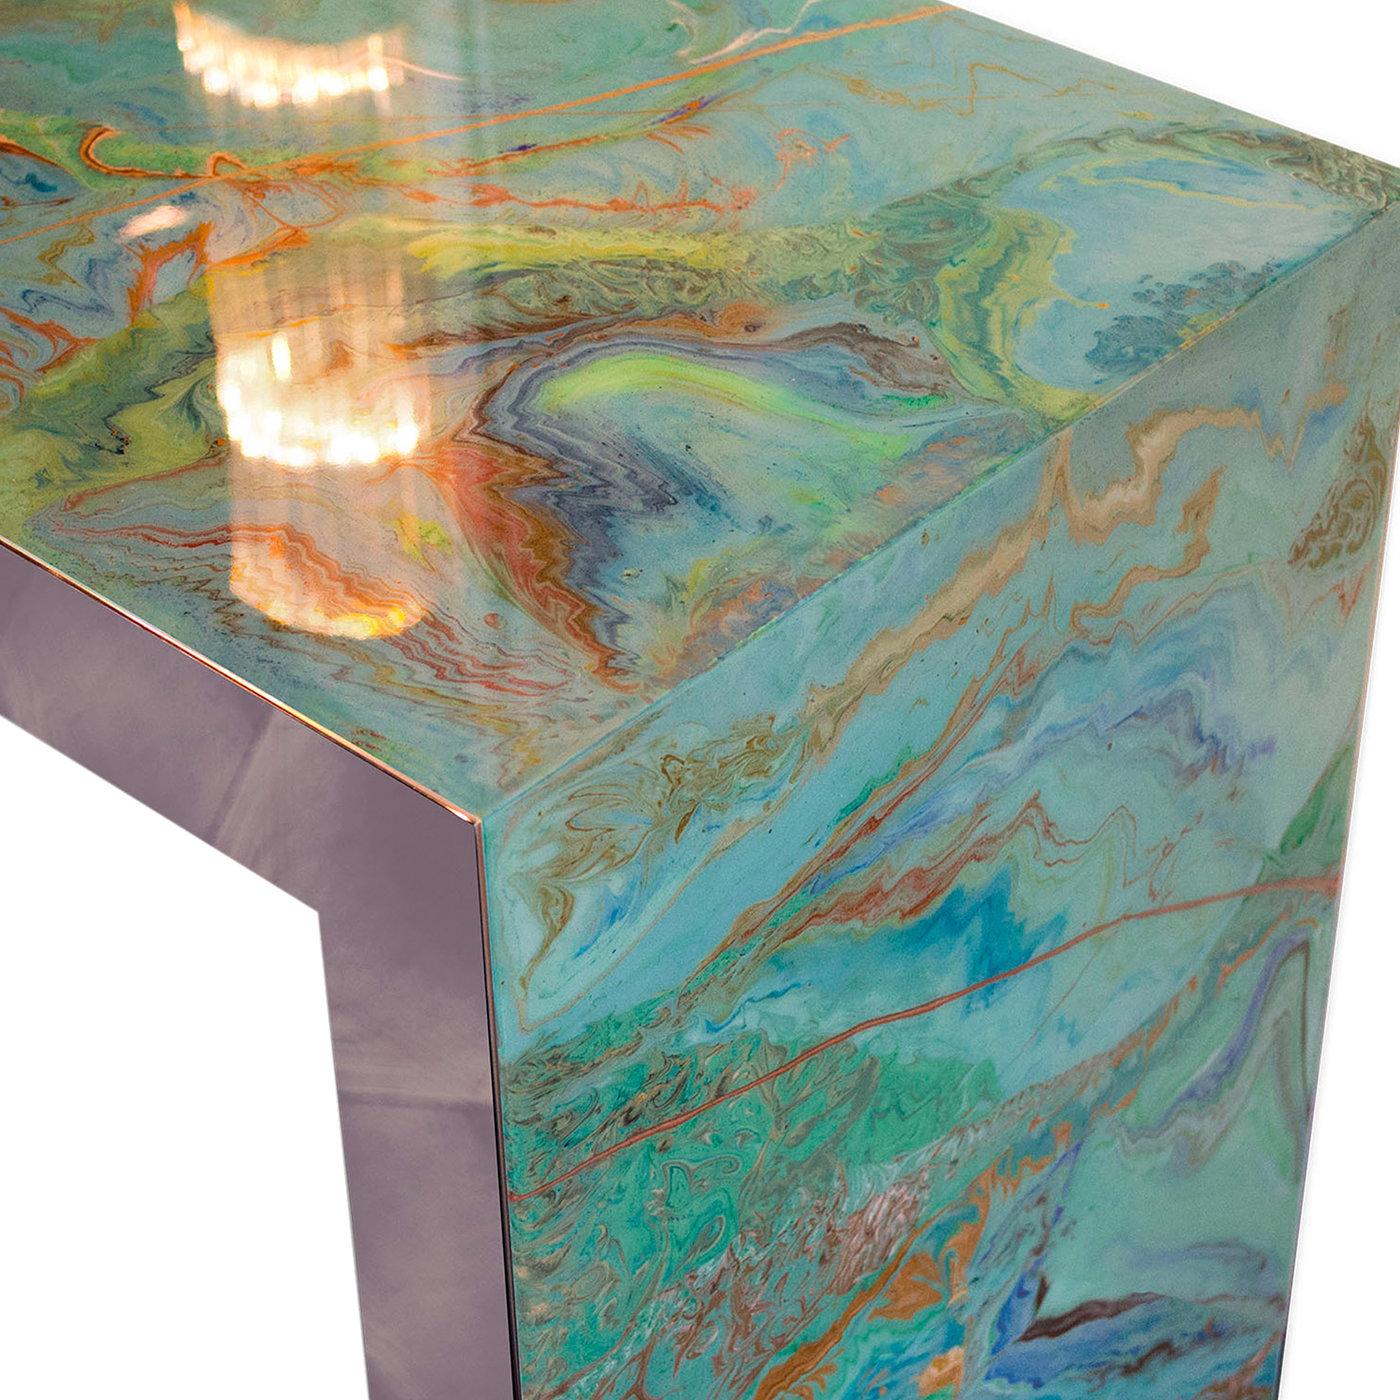 Minimal yet sophisticated, the geometric lines and luxurious texture of this console give it a glamorous appeal that will suit any dining room, living room, or foyer decor. The long, open frame is highlighted by the imposing aquamarine scagliola in